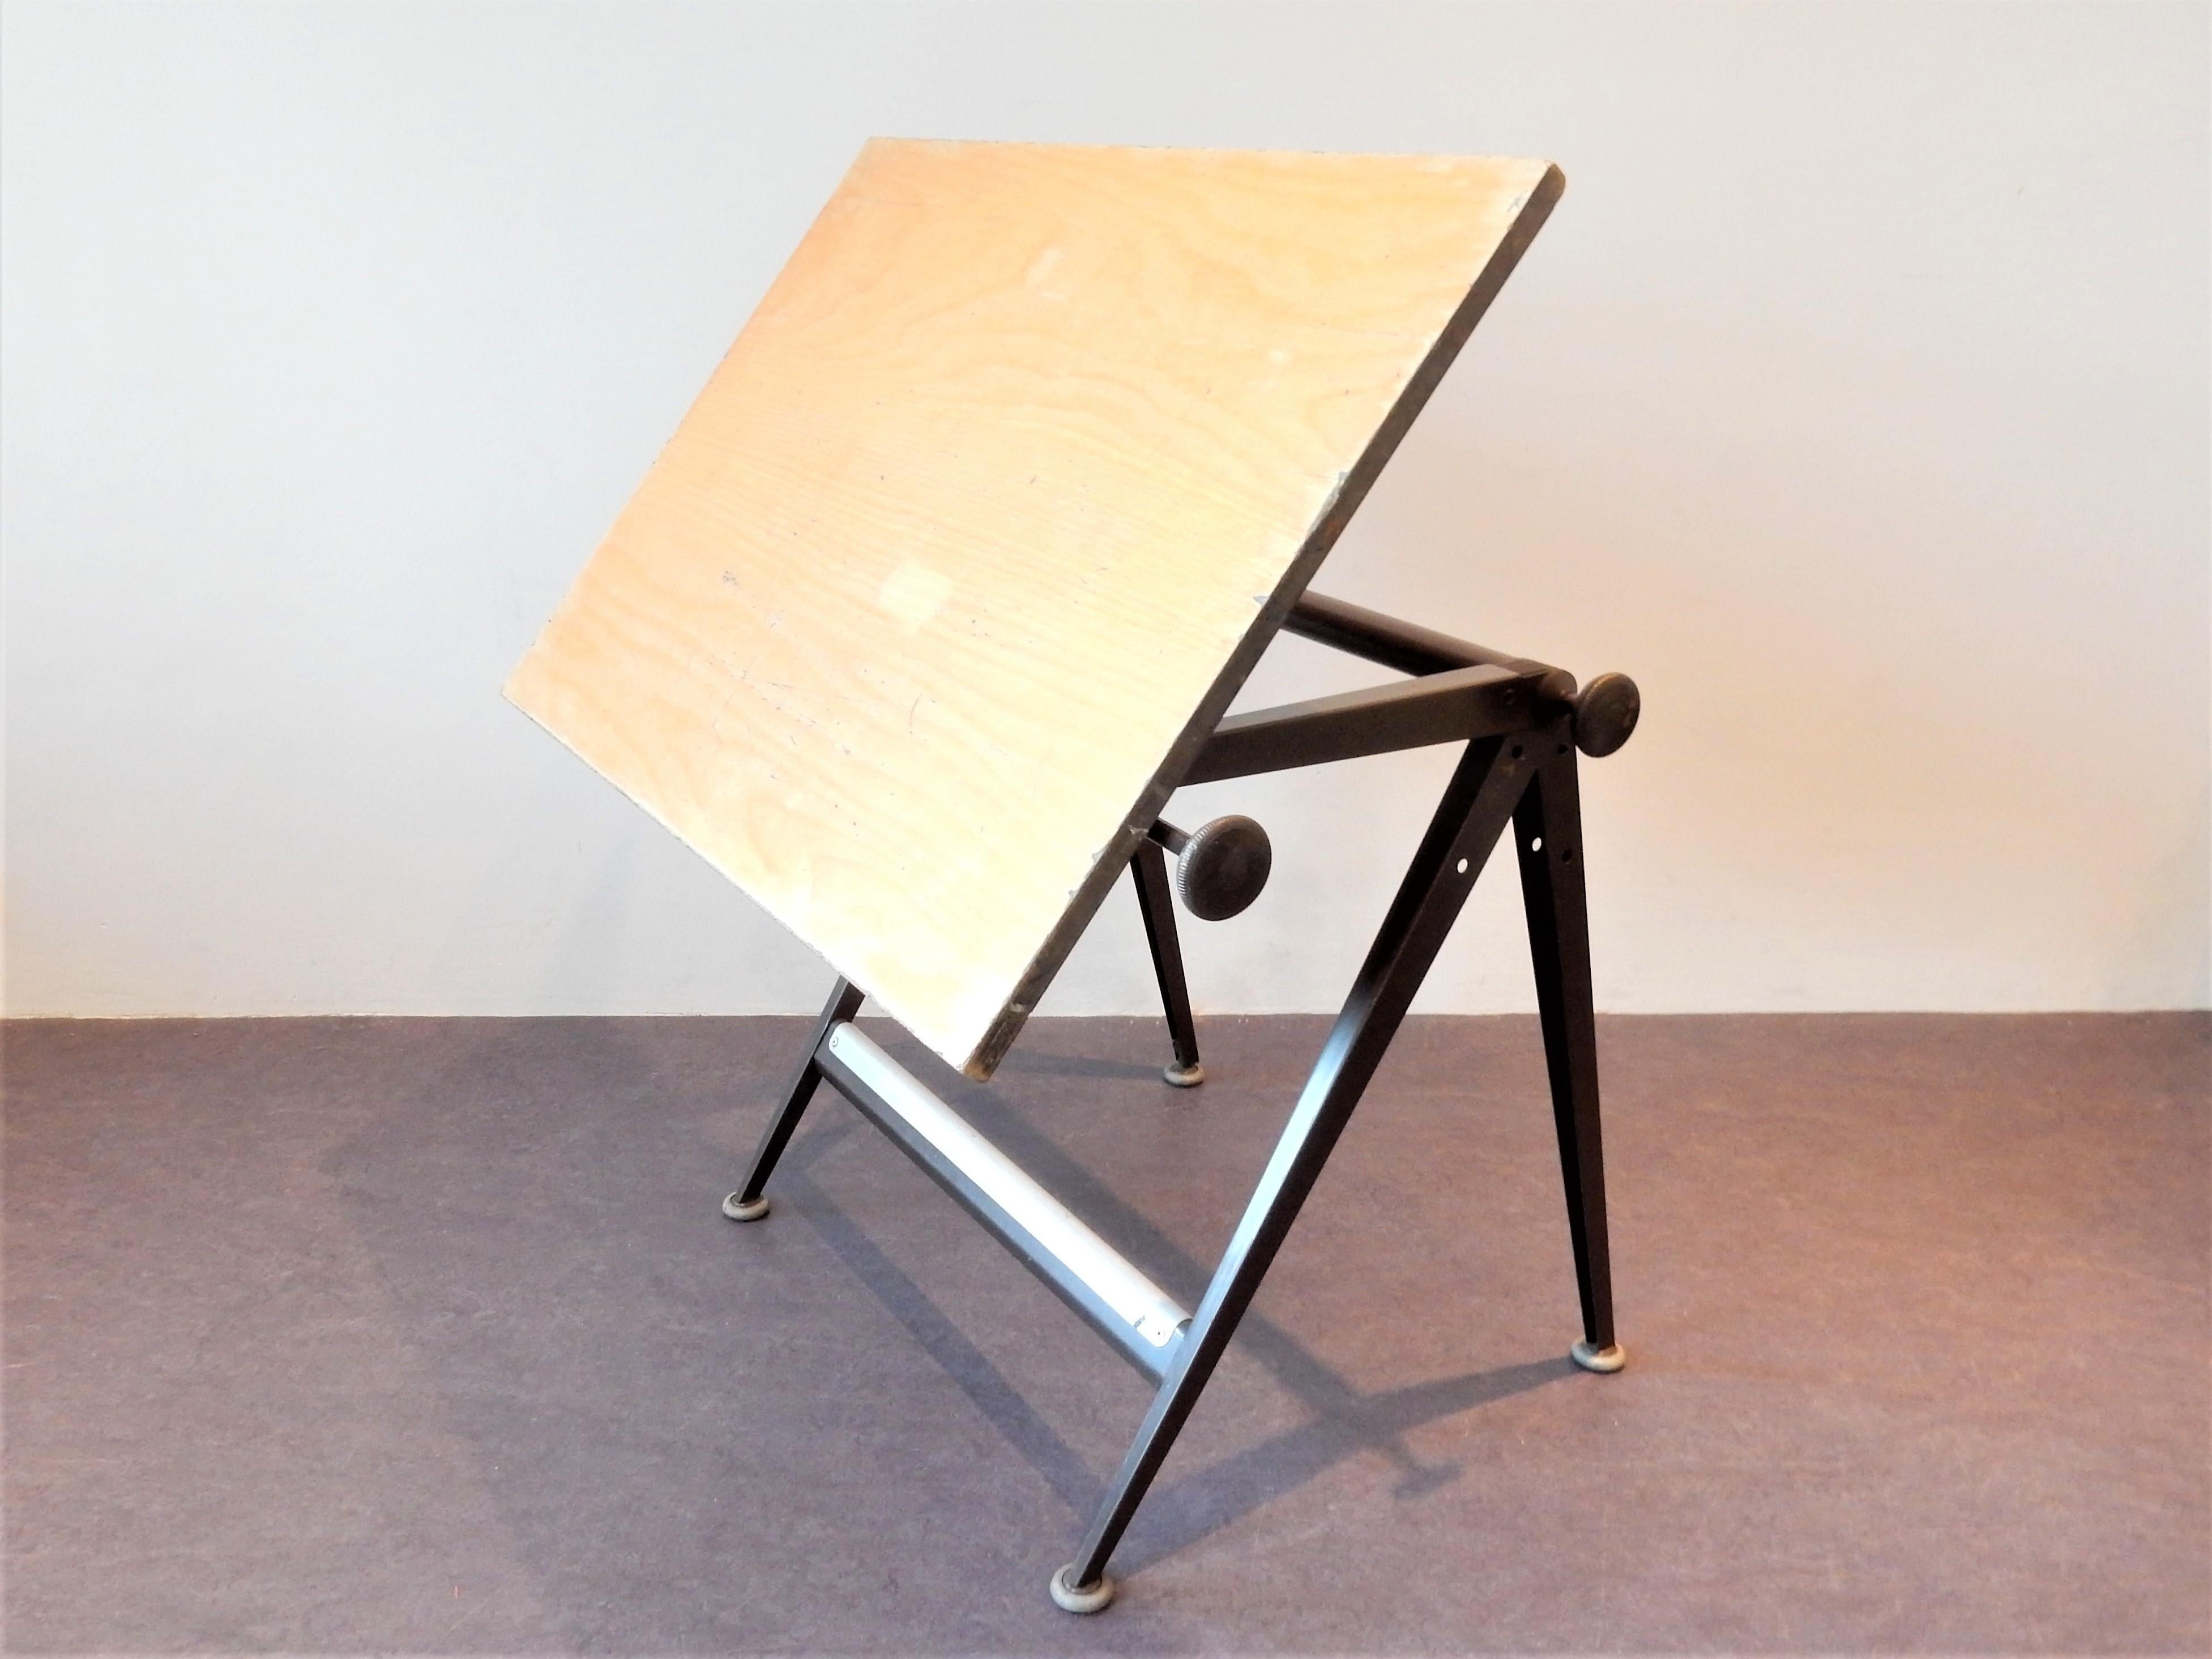 Metal 'Reply' Drafting Table by Friso Kramer and Wim Rietveld for Ahrend, Dutch design